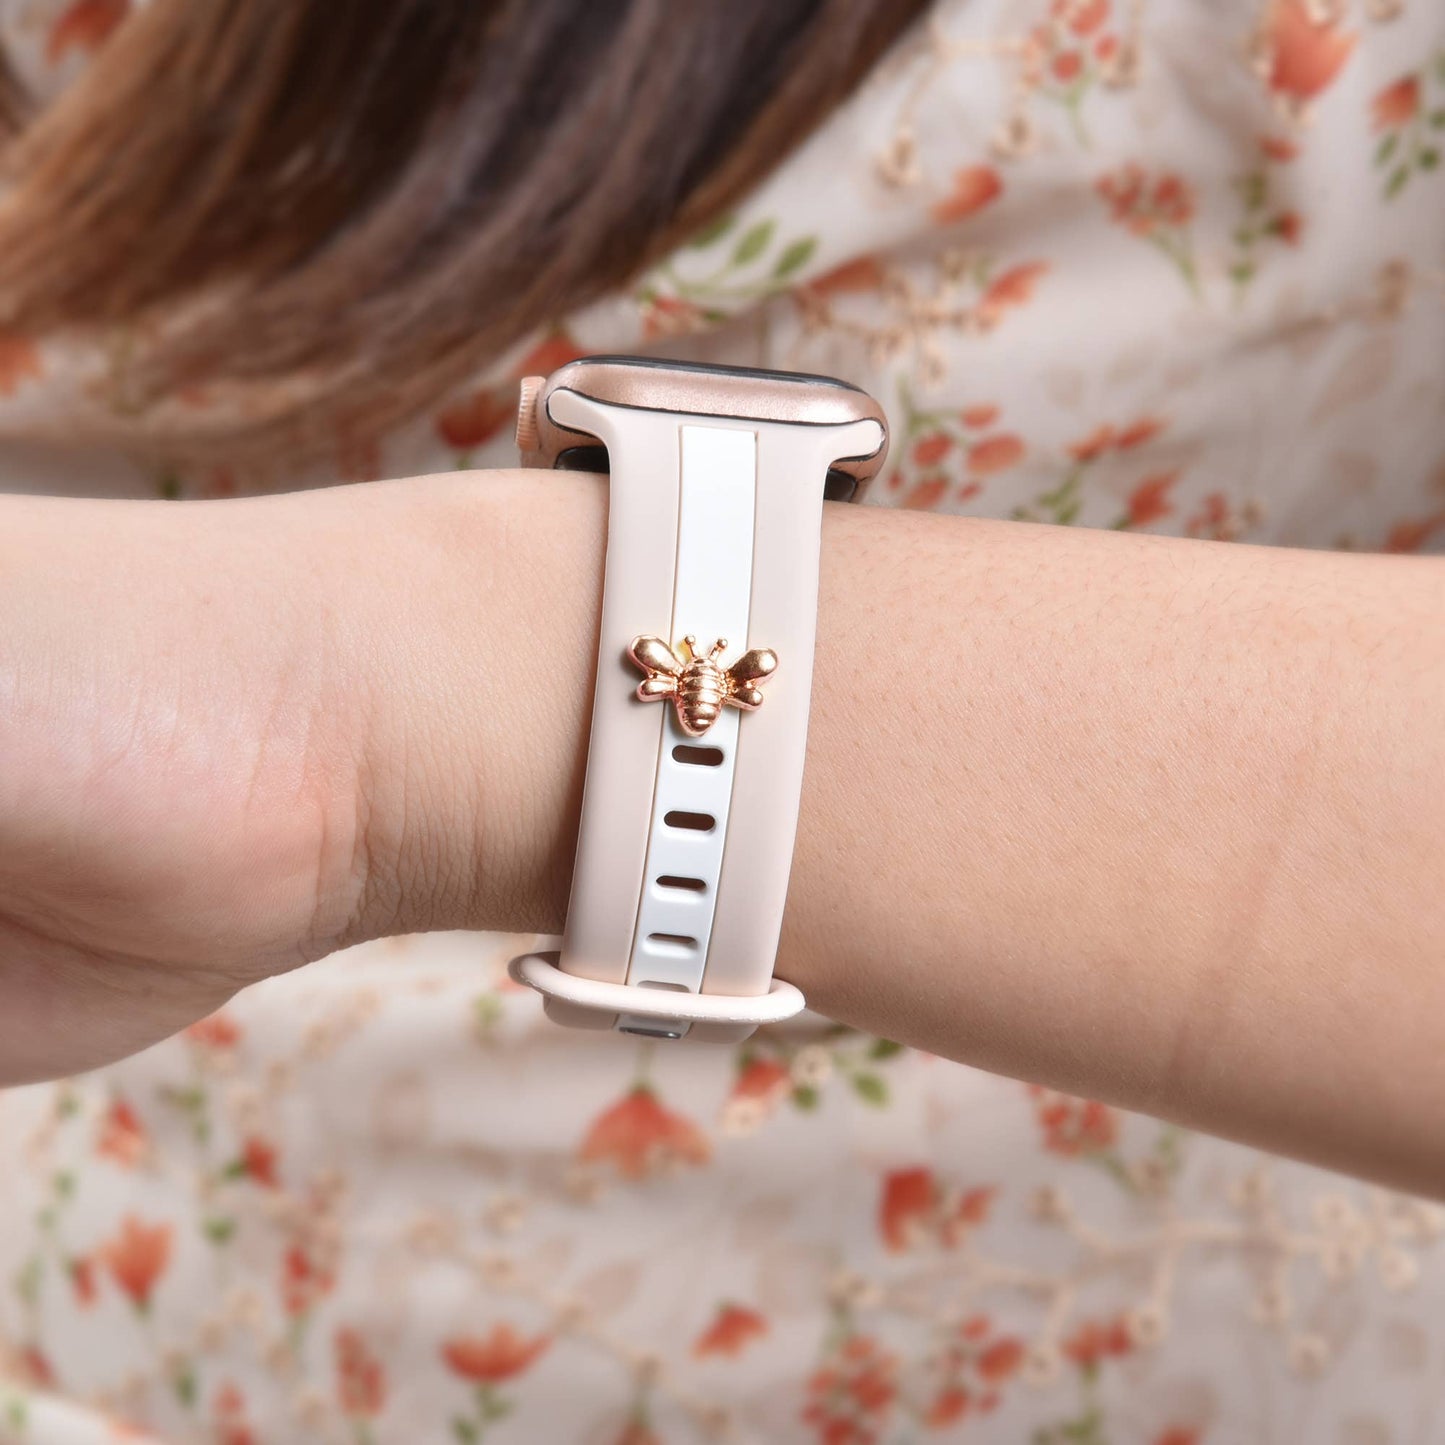 ShopTrendsNow - Apple Watch Silicone Band With Bee Charm Stud